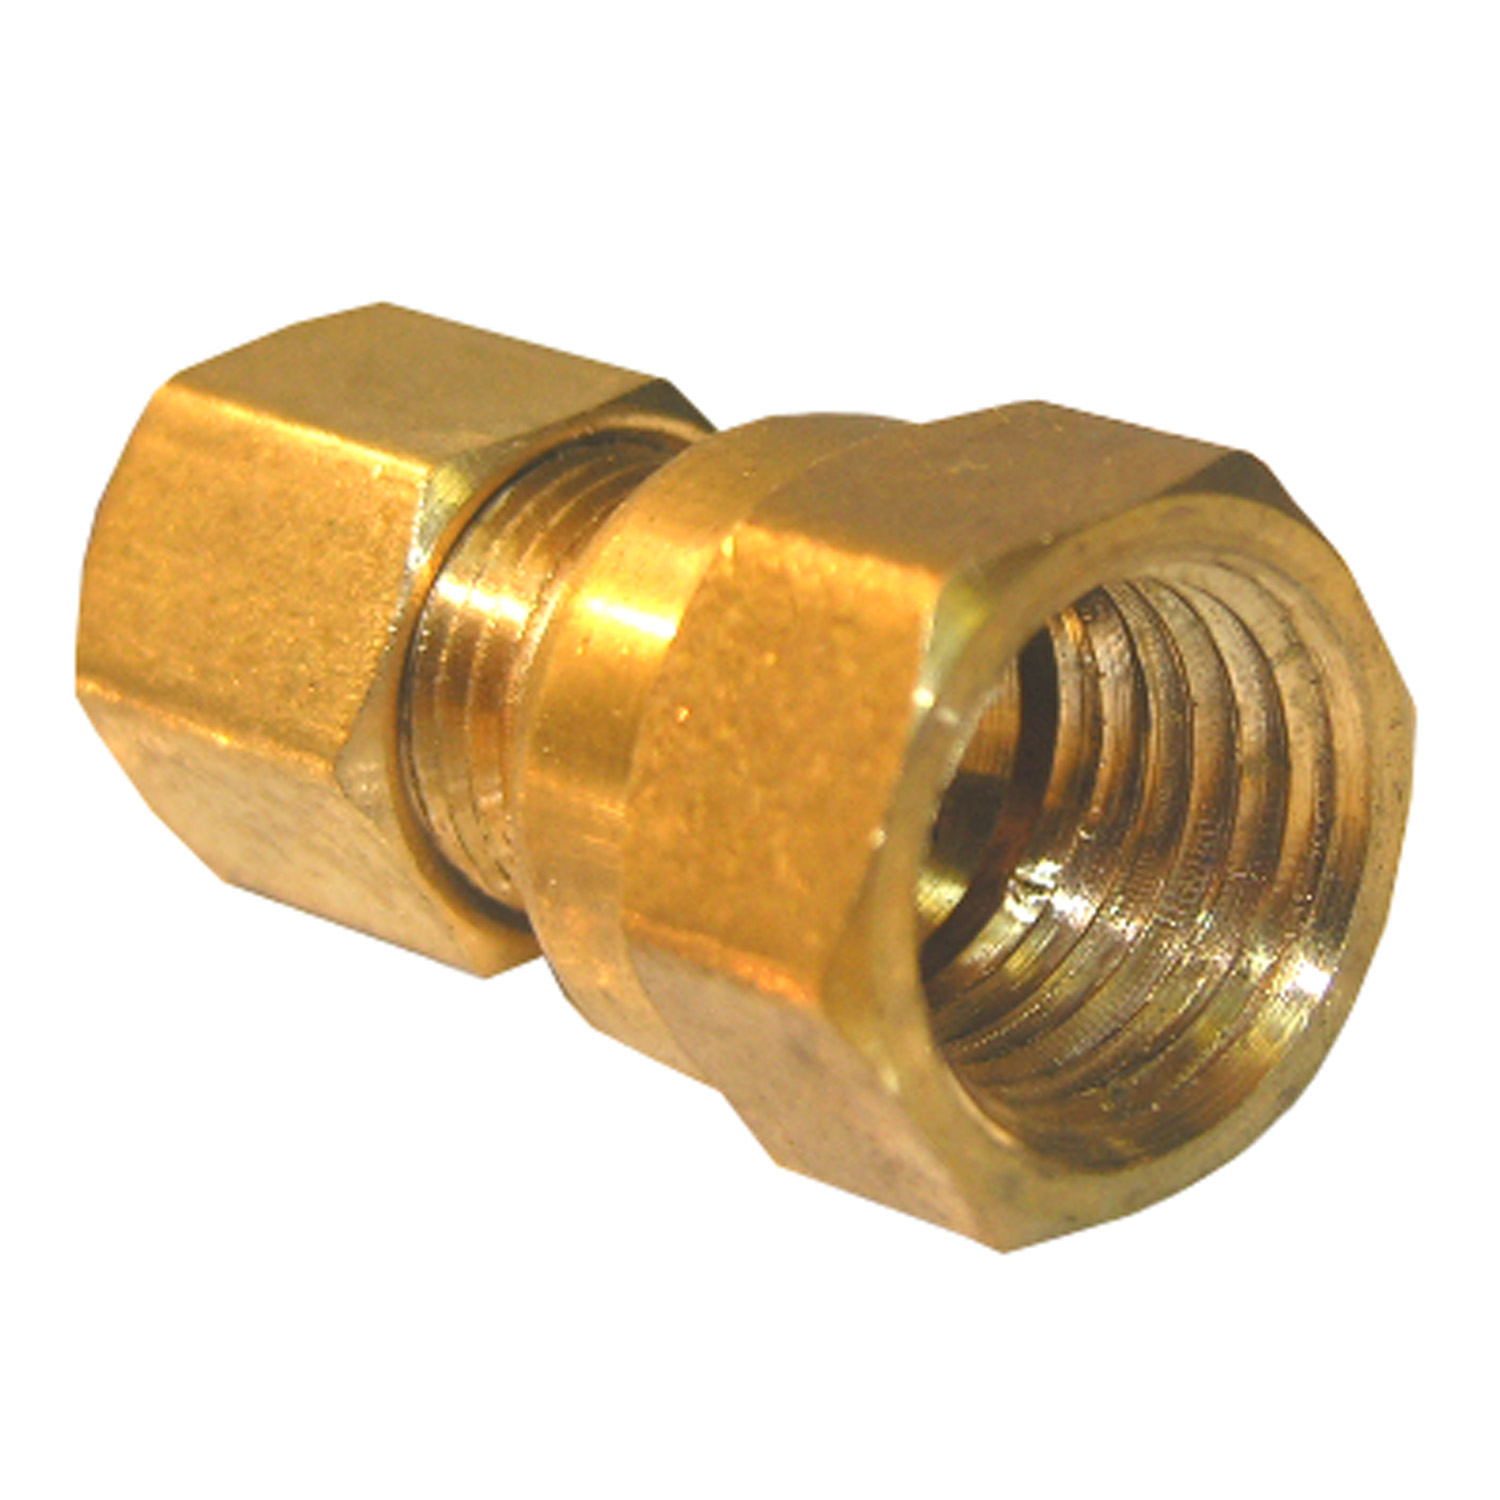 17-6613 Pipe Adapter, 1/4 in, Compression x FPT, Brass, 150 psi Pressure